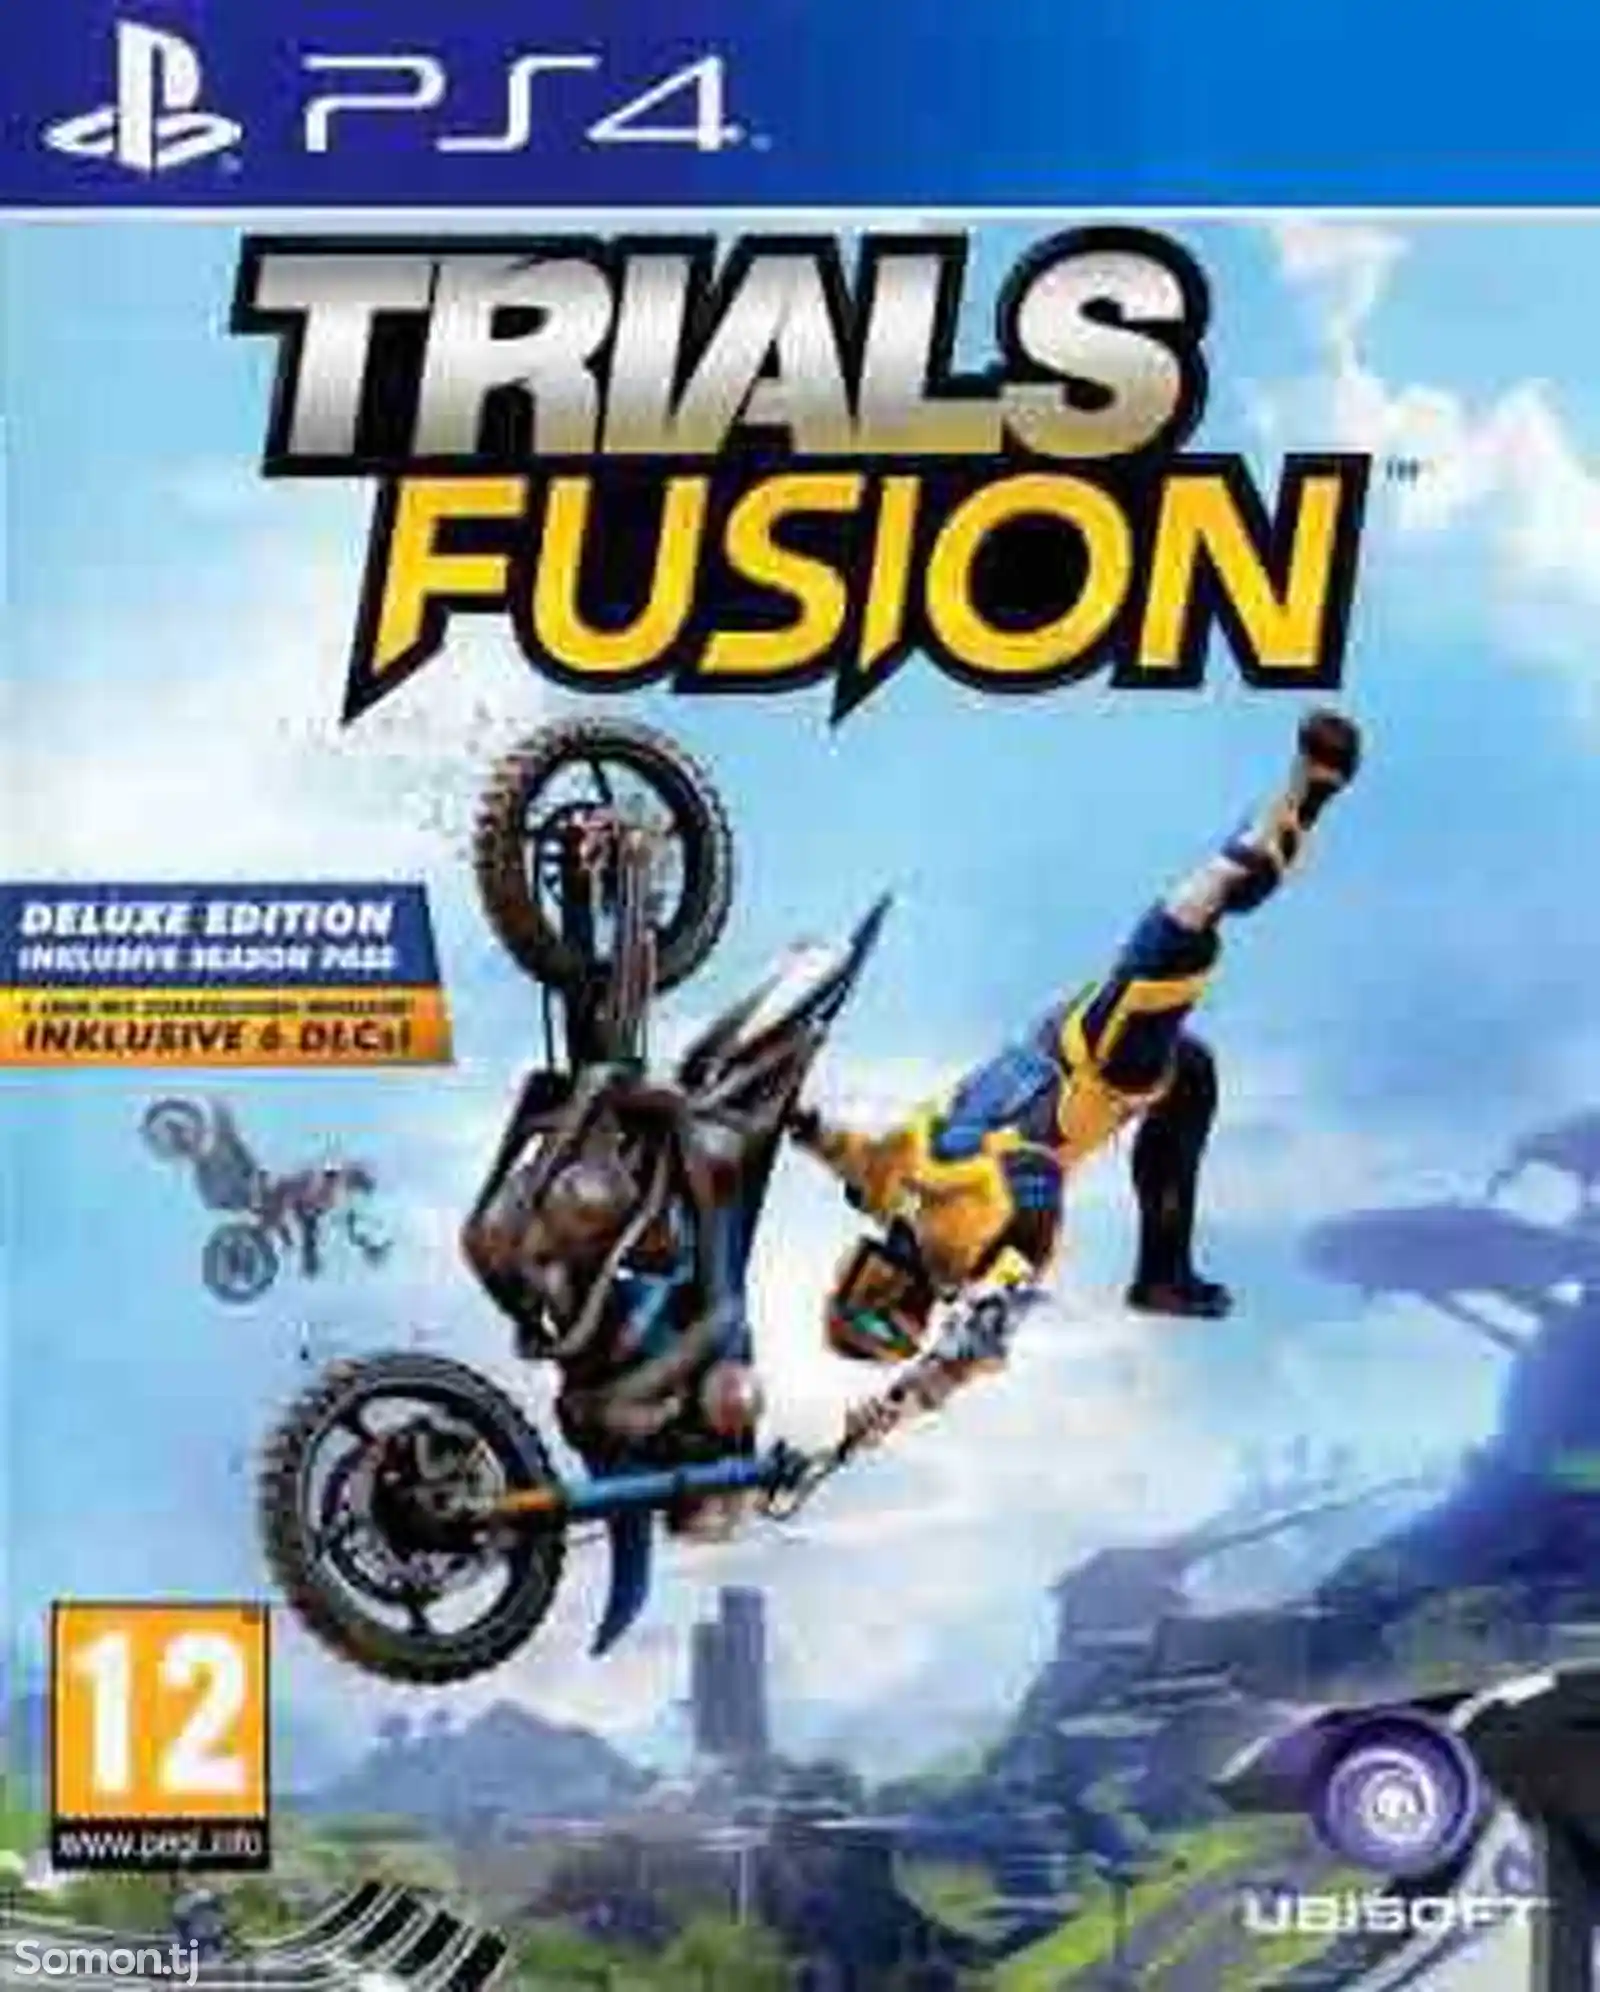 Игра Trials fusion the awesome max для PS-4 / 5.05 / 6.72 / 7.02 / 7.55 / 9.00 /